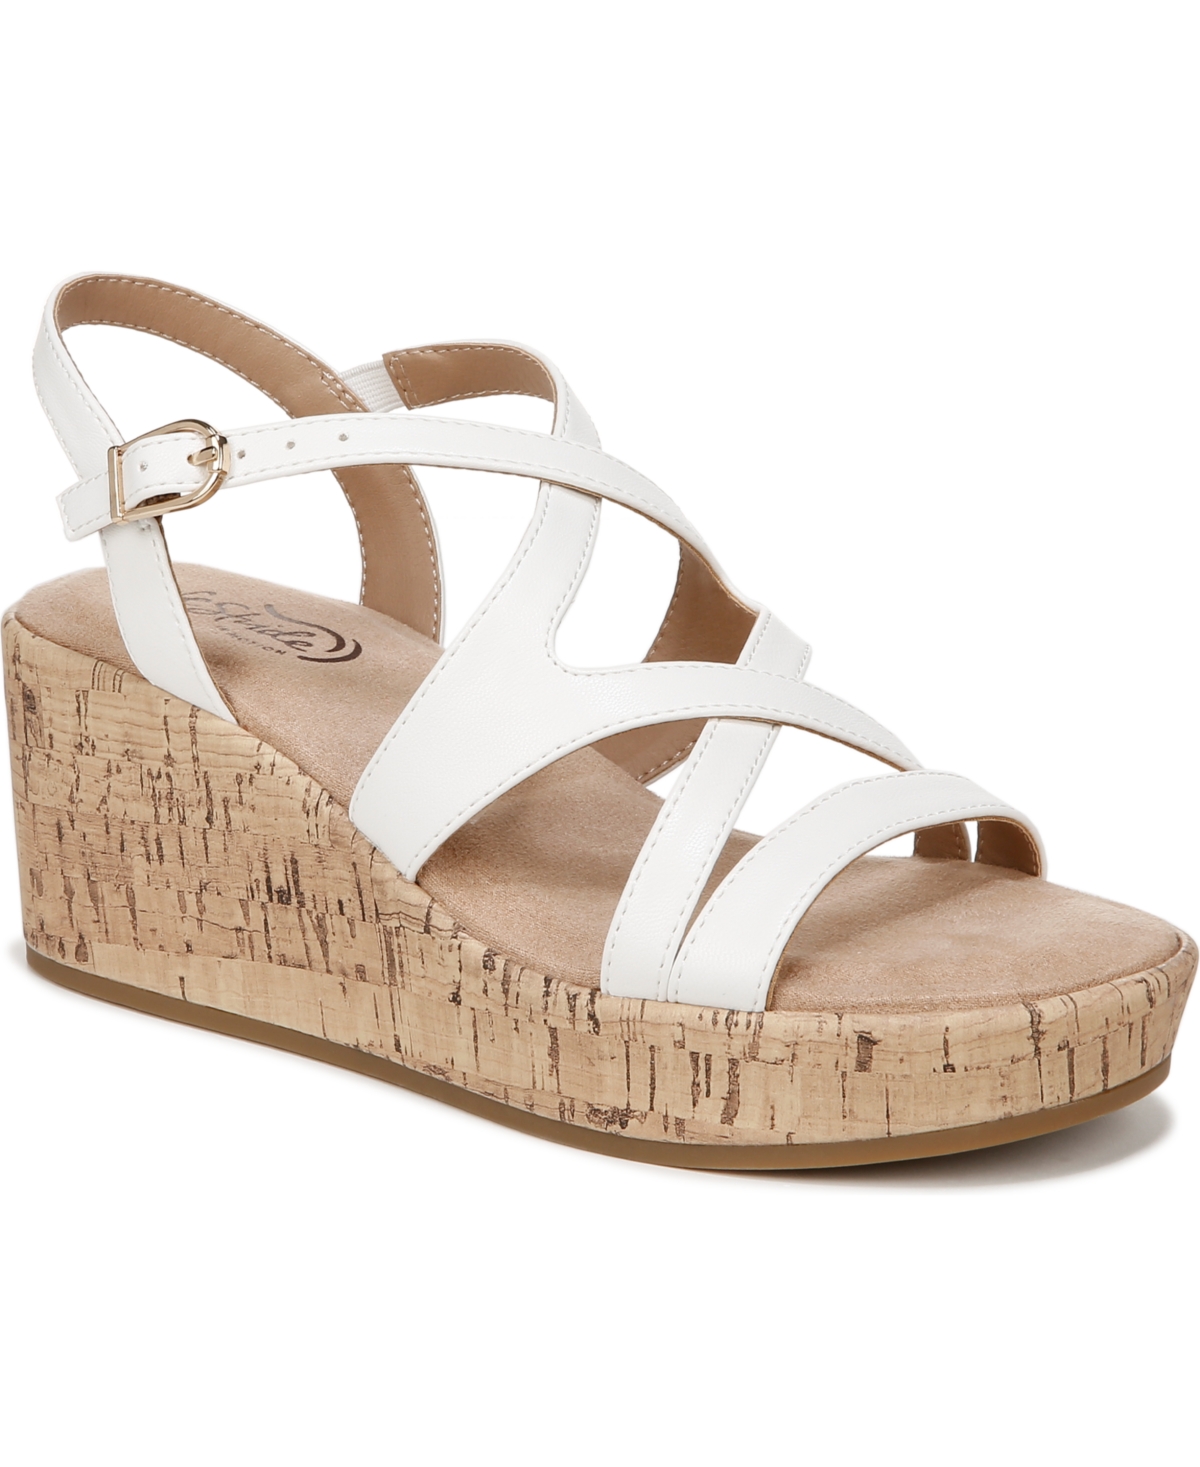 Lifestride Bailey Strappy Platform Sandals In Bright White Faux Leather